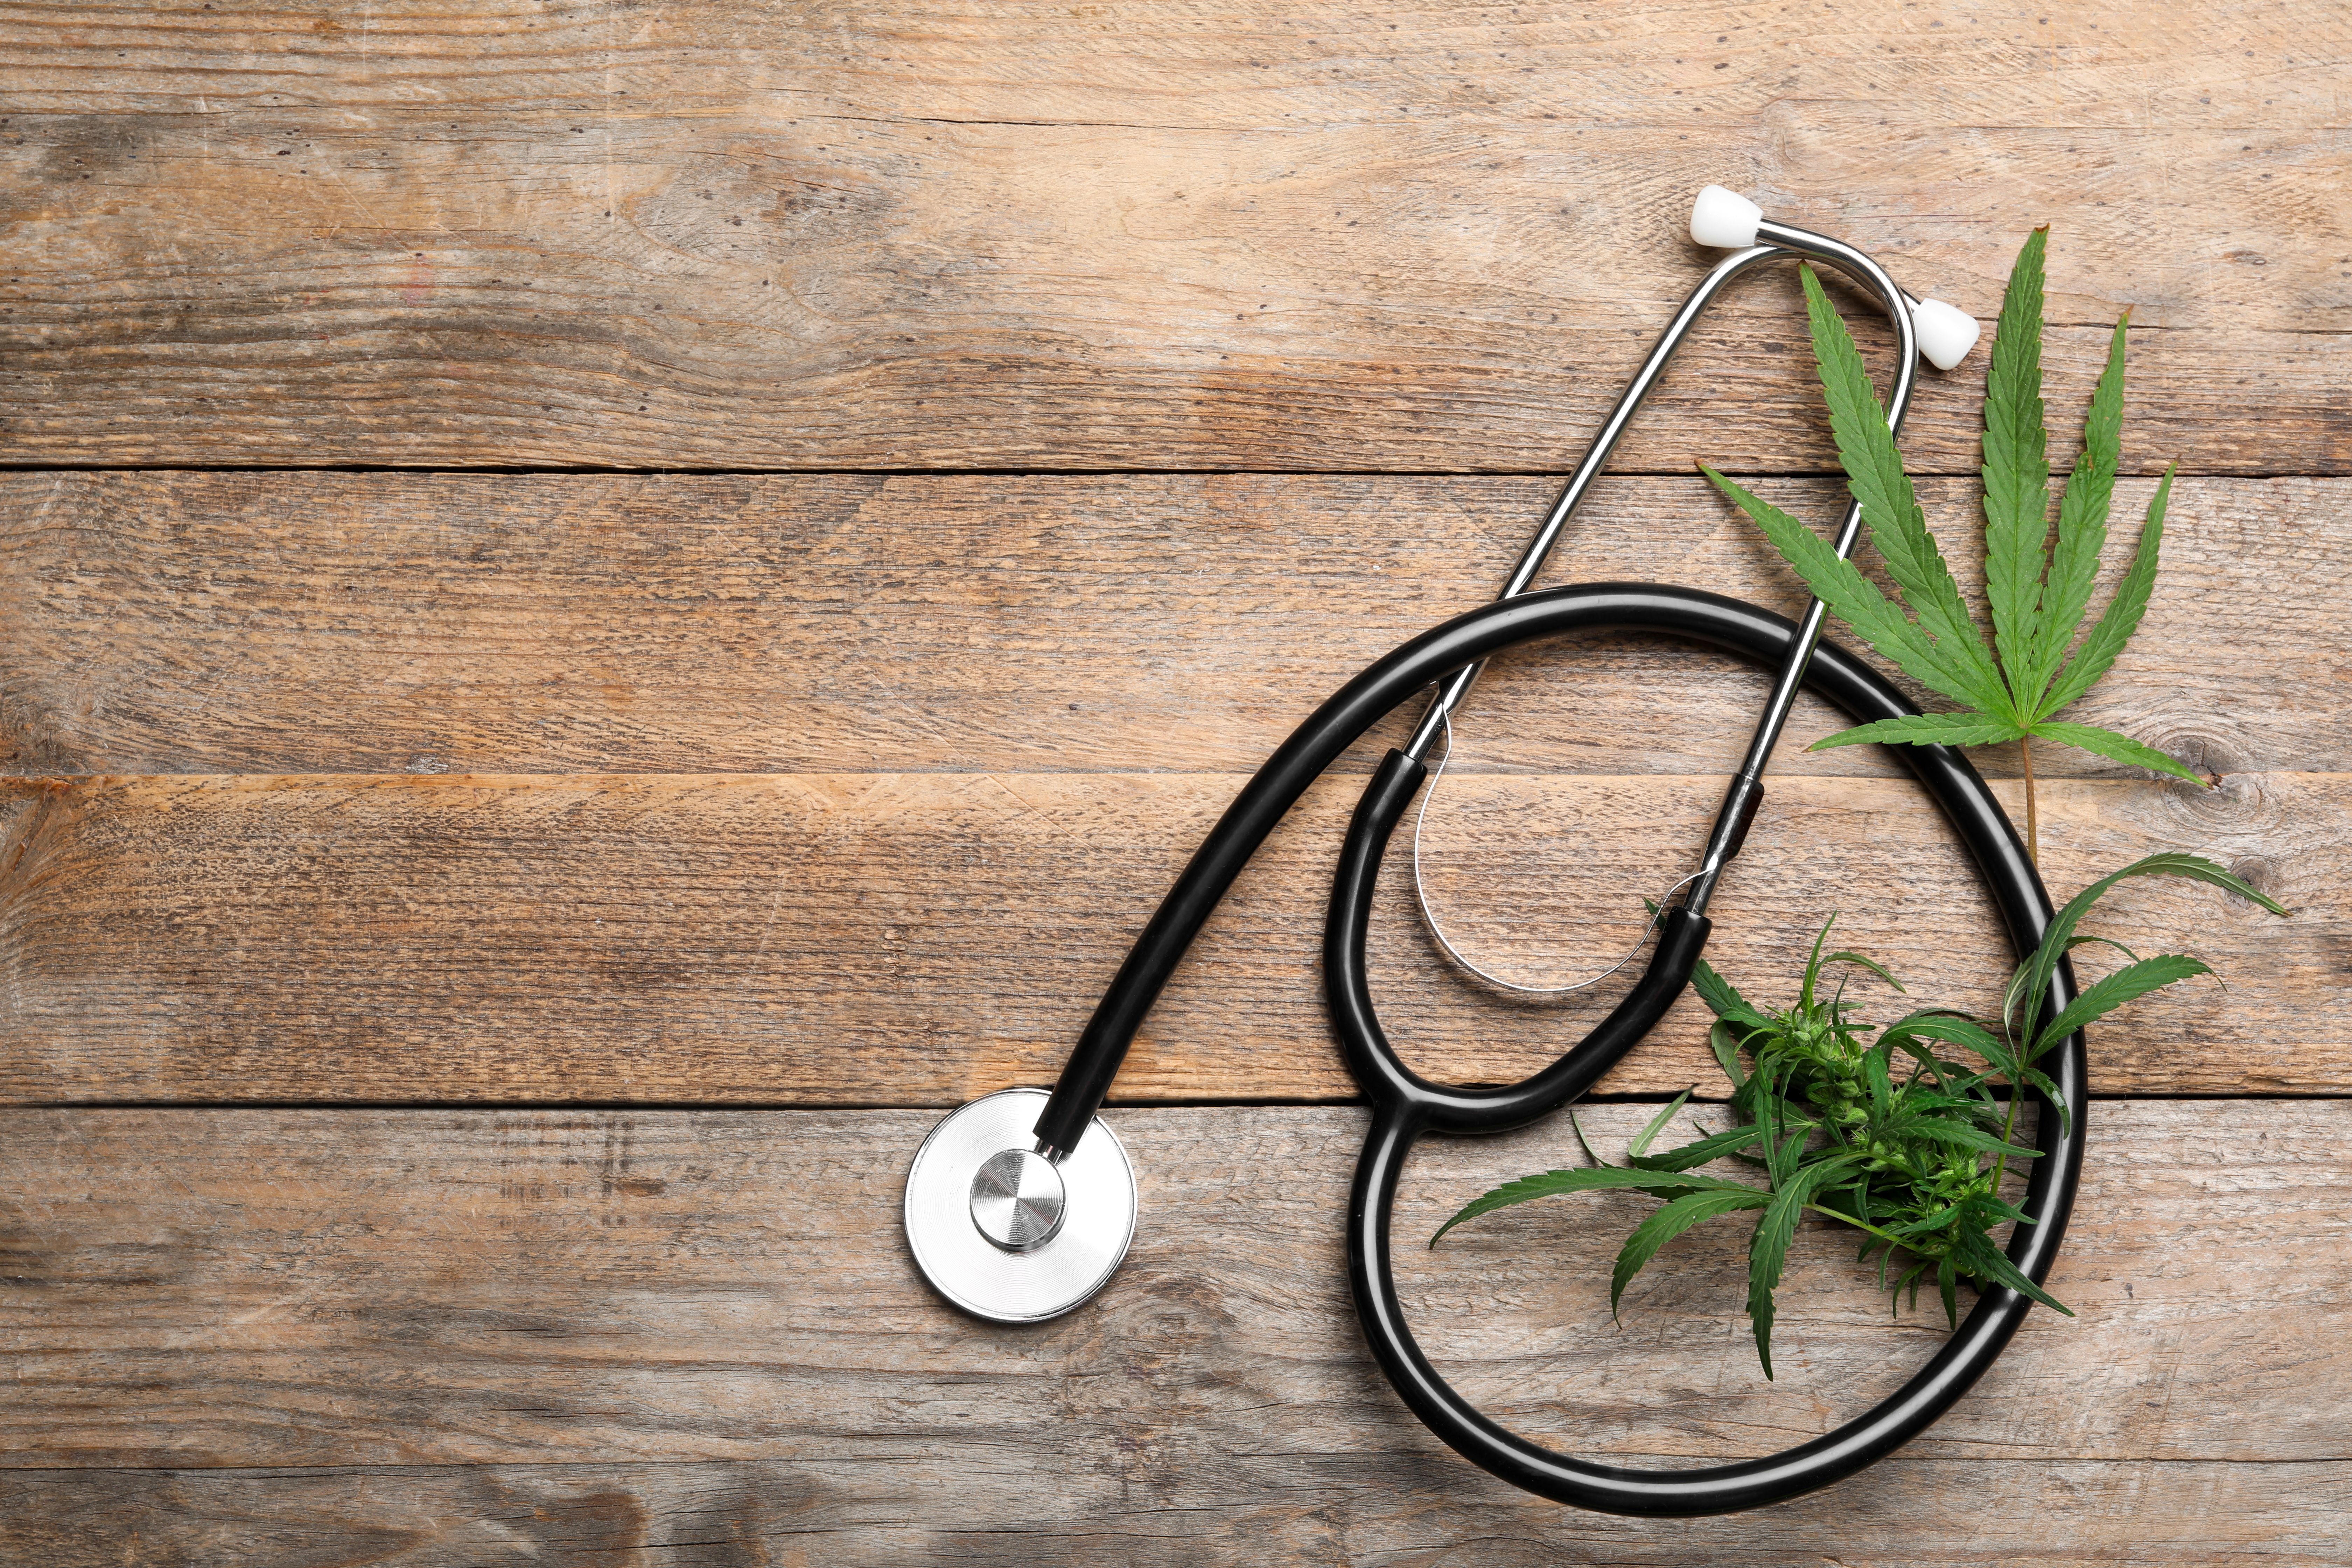 Cannabis Leaves and Stethoscope | image credit: New Africa - stock.adobe.com